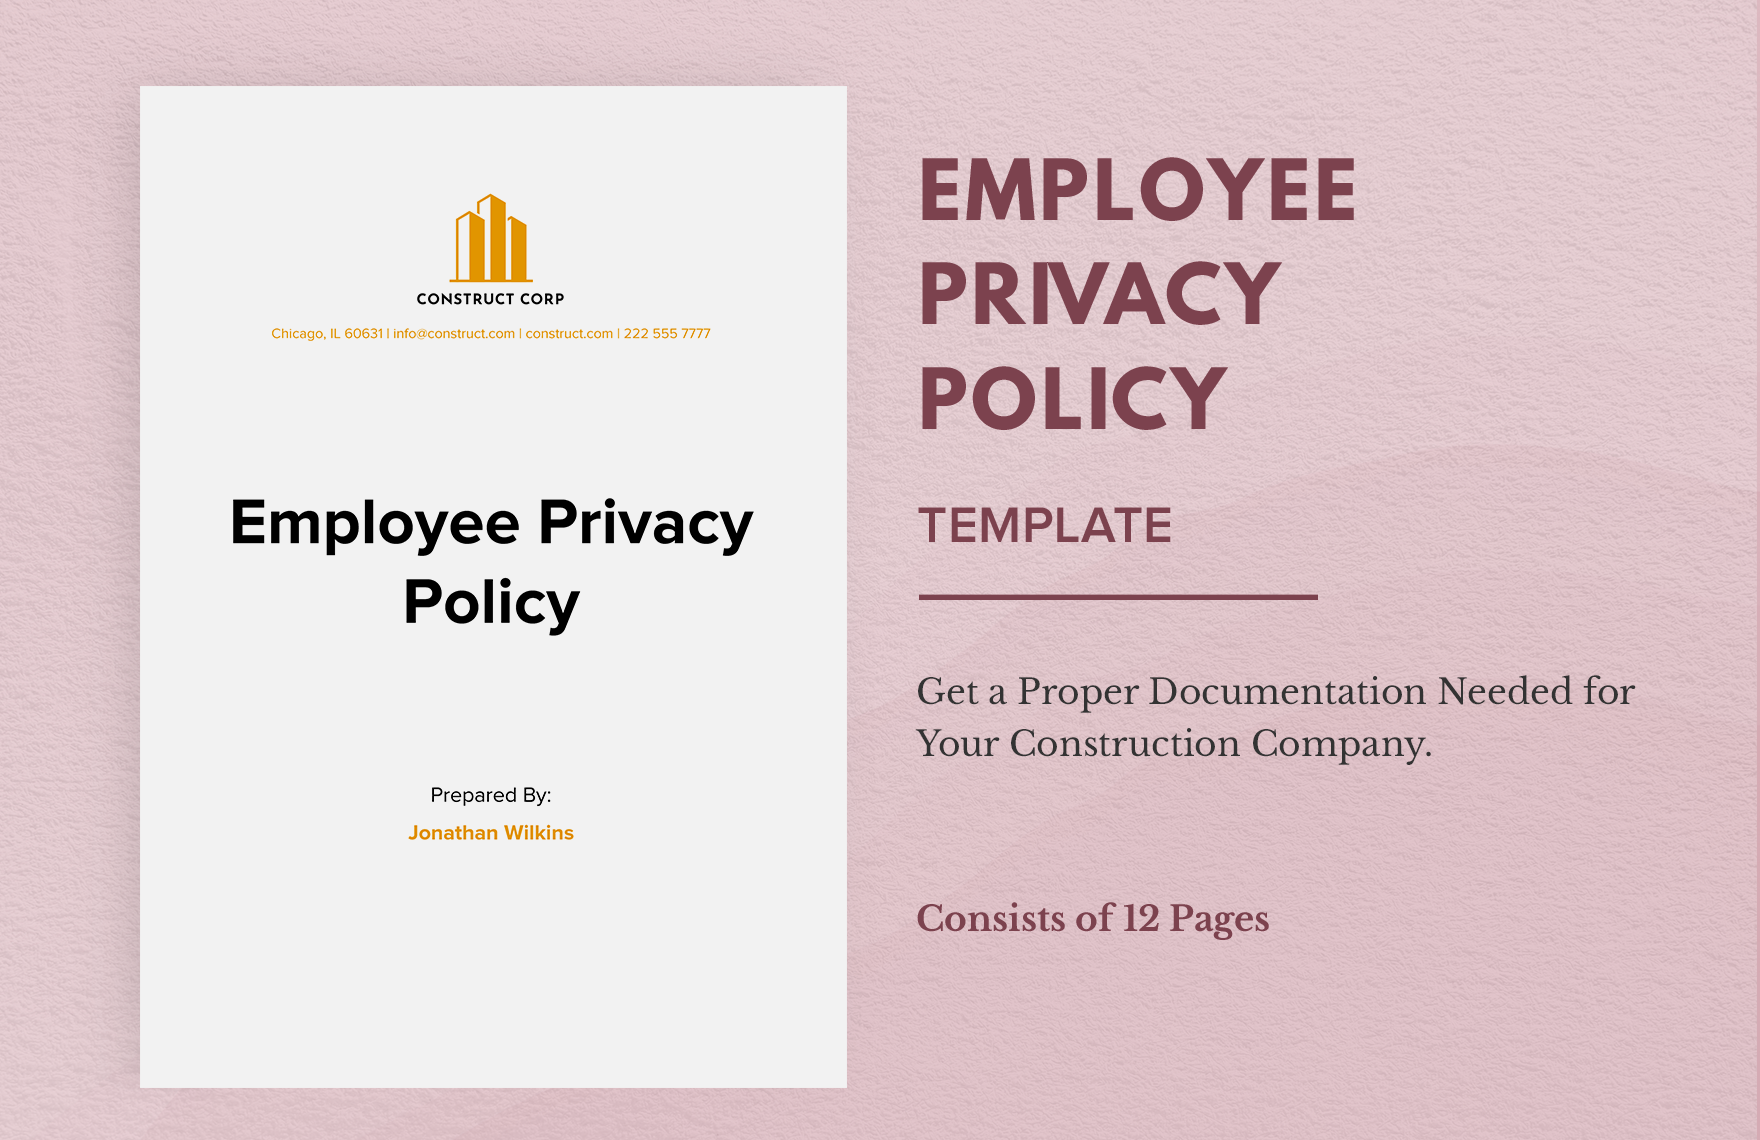 Employee Privacy Policy Template Download in Word, Google Docs